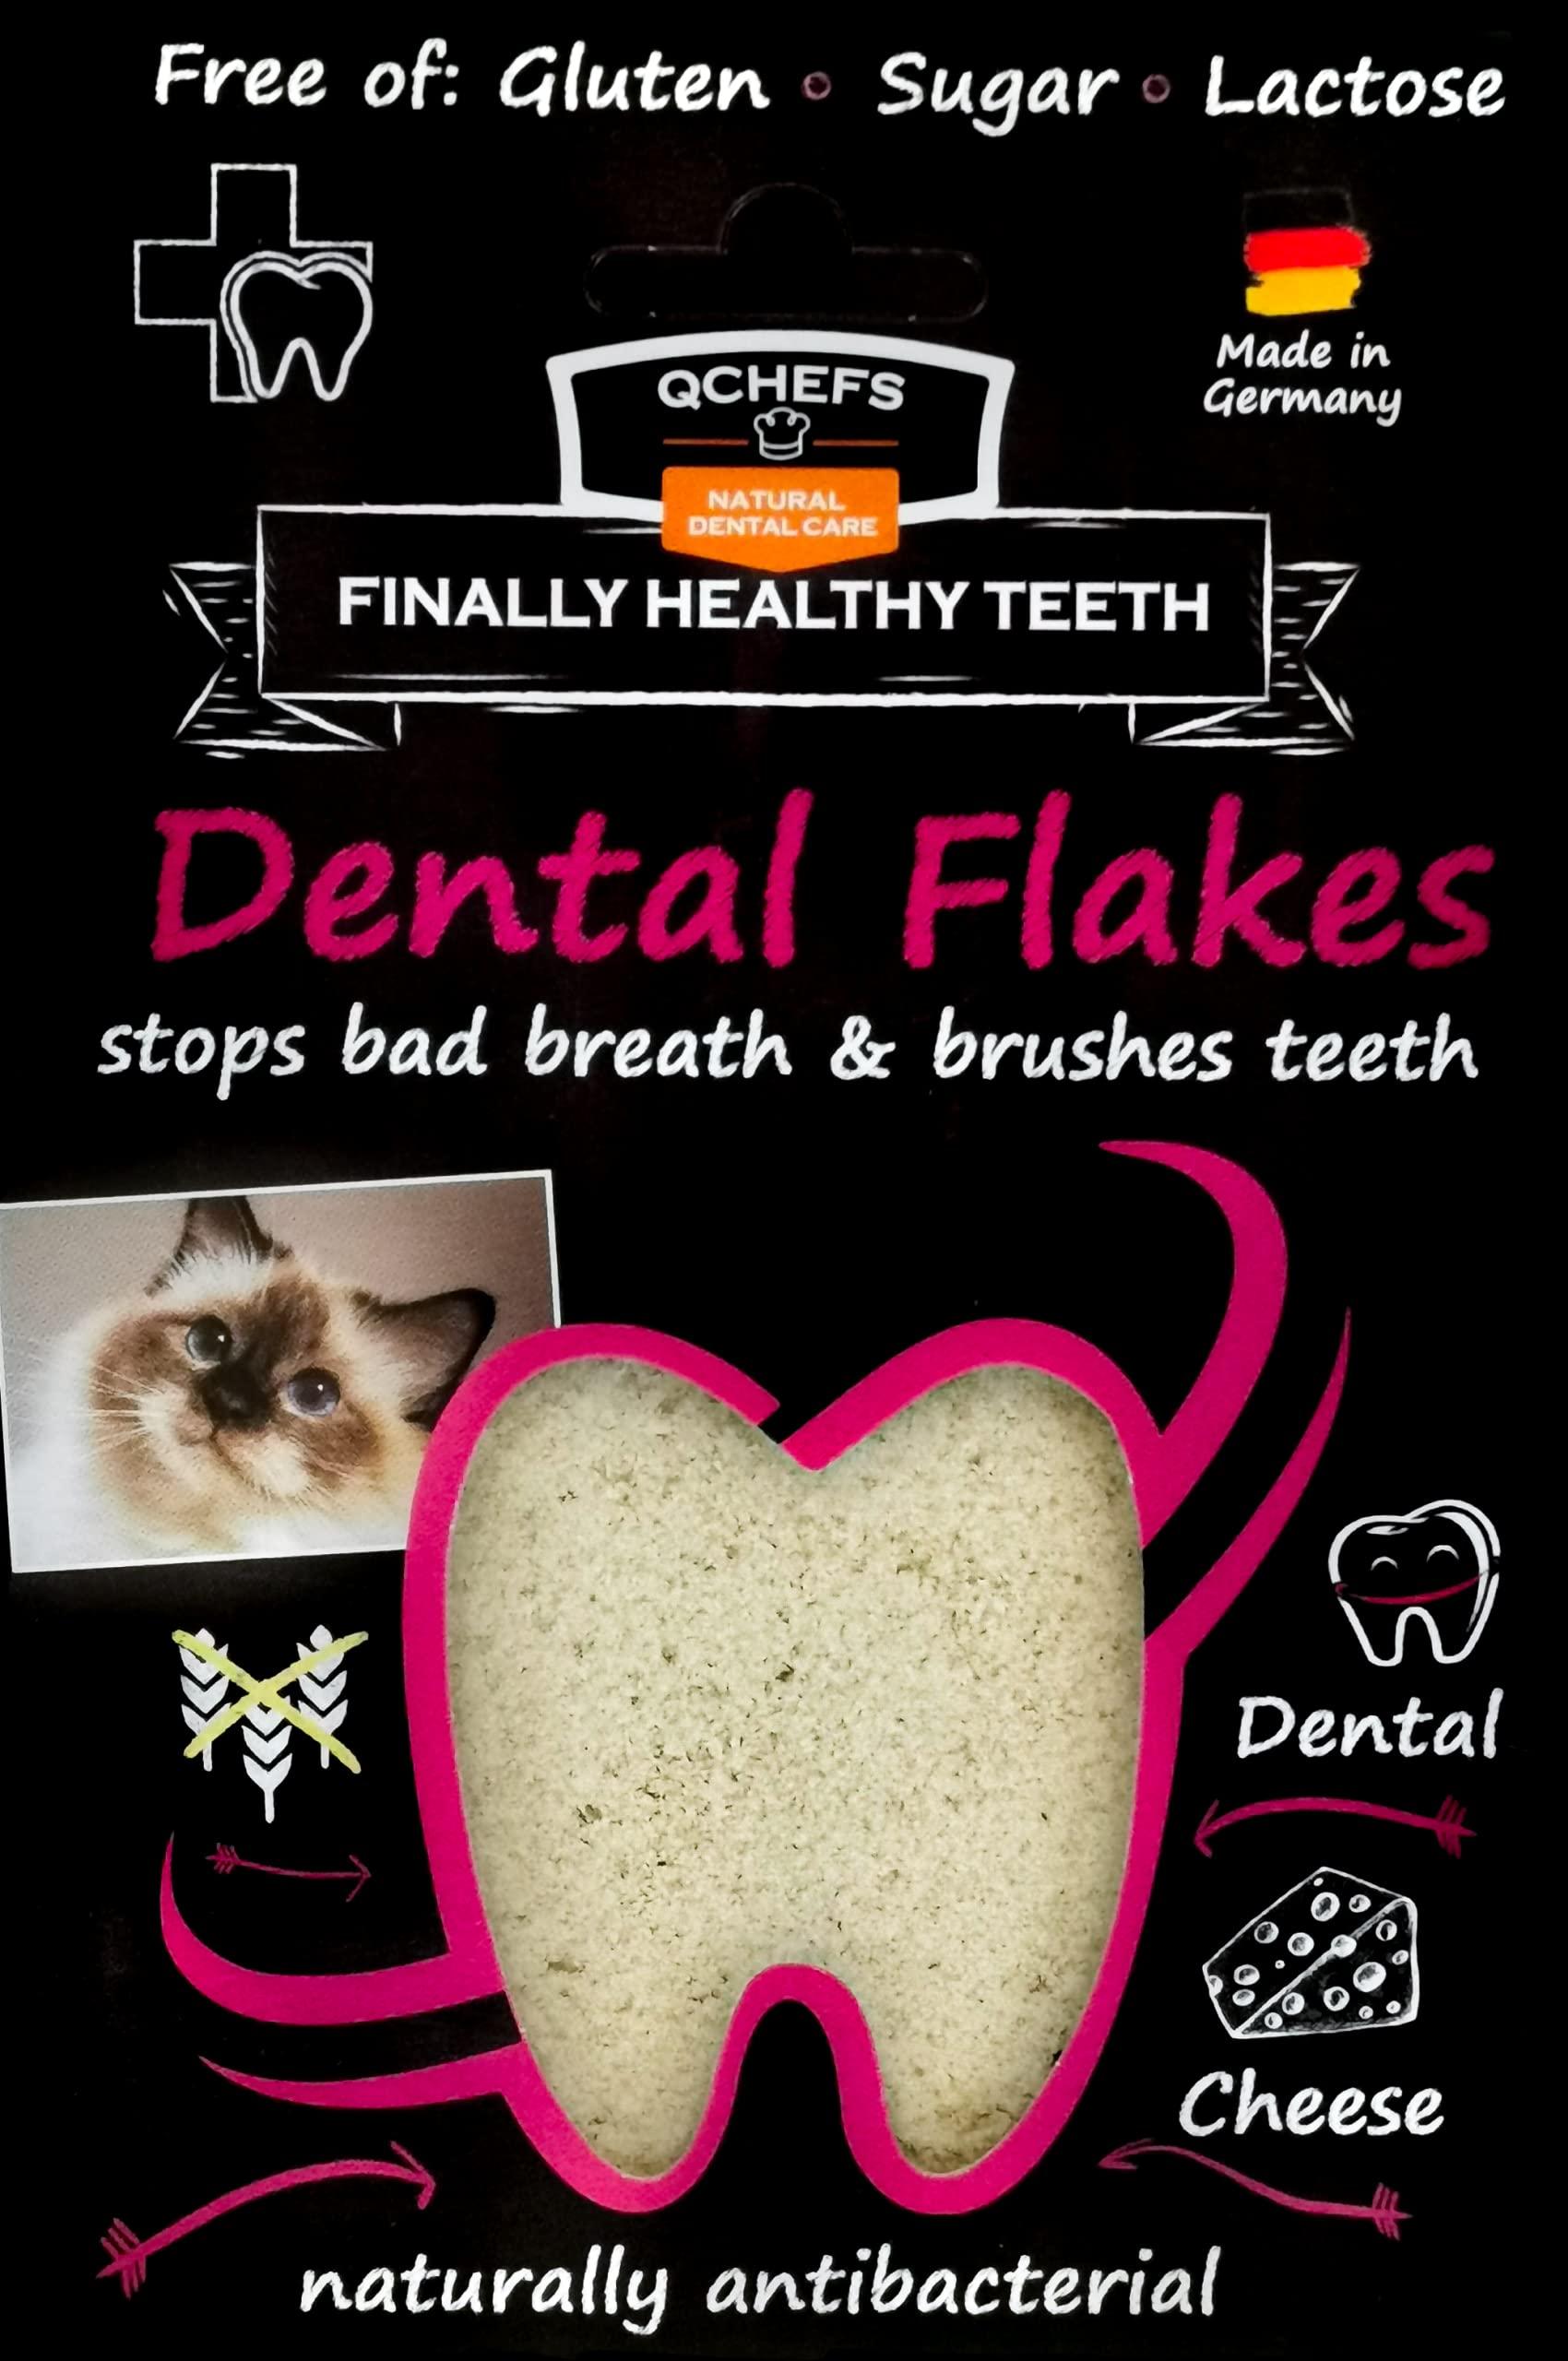 QCHEFS Dental Flakes for Cats - Two Month Supply* - Food Topper - After Meal Licking Treat, Oral Health Snack with Amino Acids.